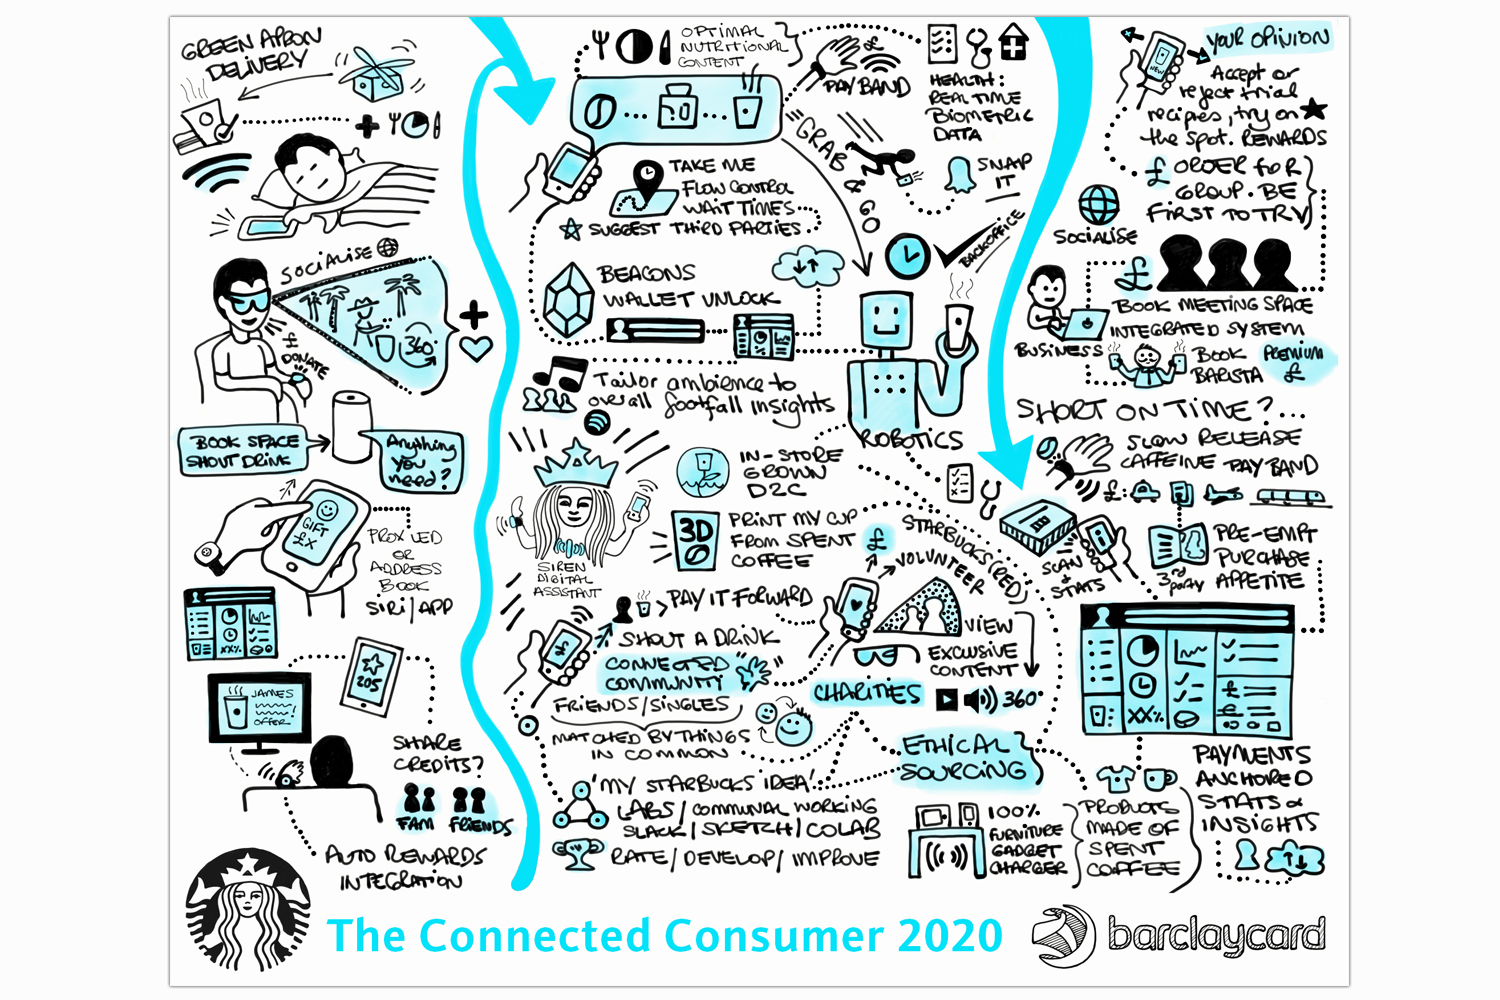  ...'a day in the life of the digitally connected consumer'... 